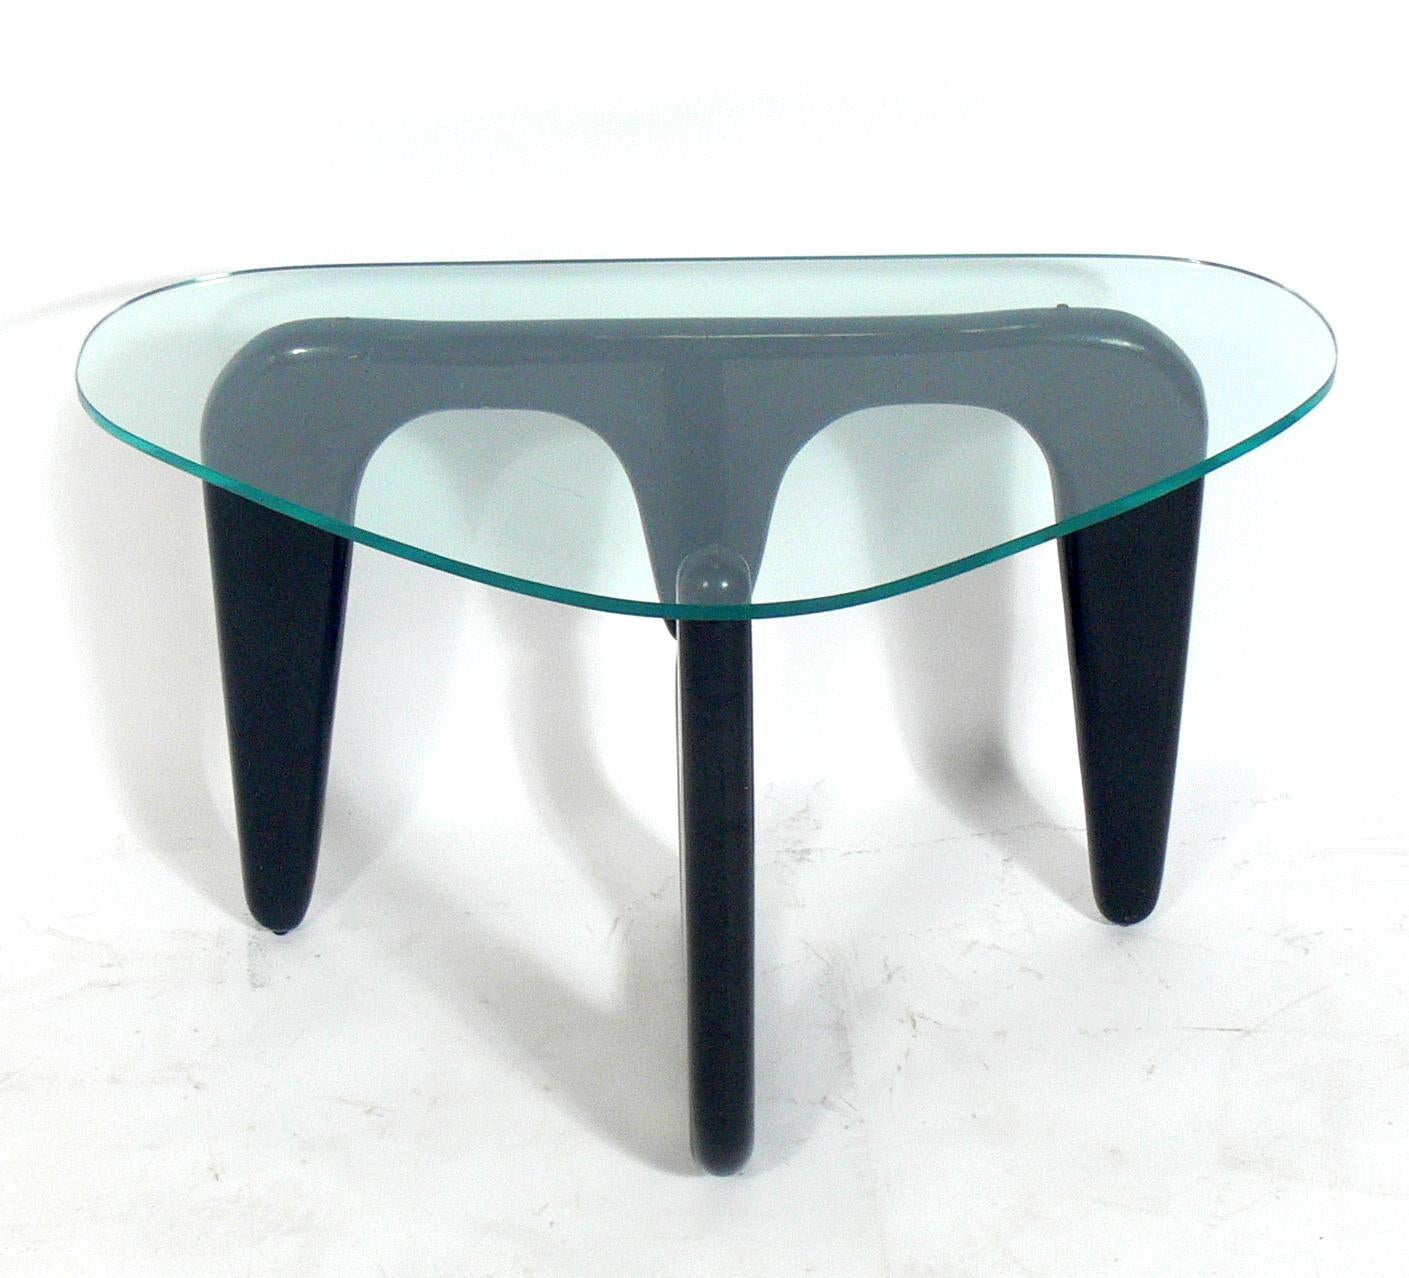 Isamu Noguchi style table, American, circa 1950s. It is a versatile size and can be used as an end or side table, or between a pair of chairs, or even as a low console table.